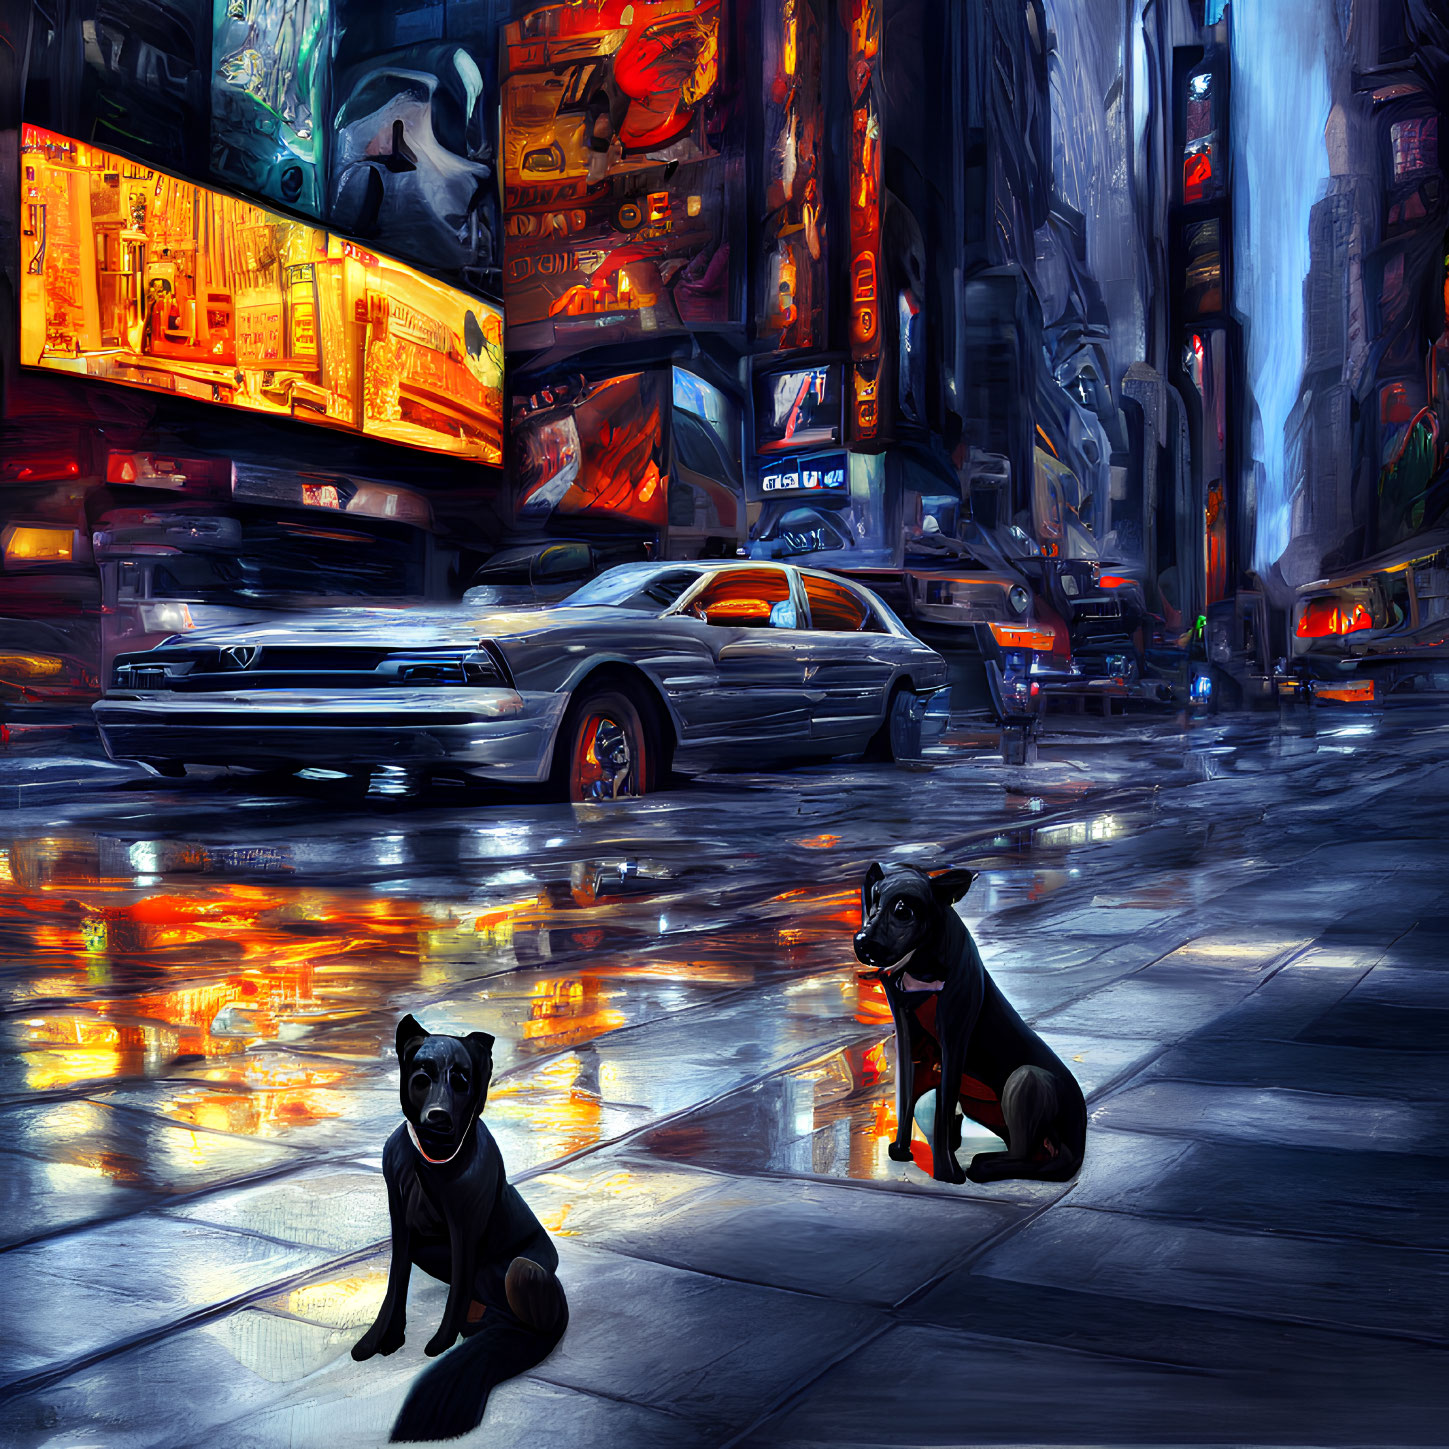 Neon-lit street with wet pavement, futuristic cars, and two dogs